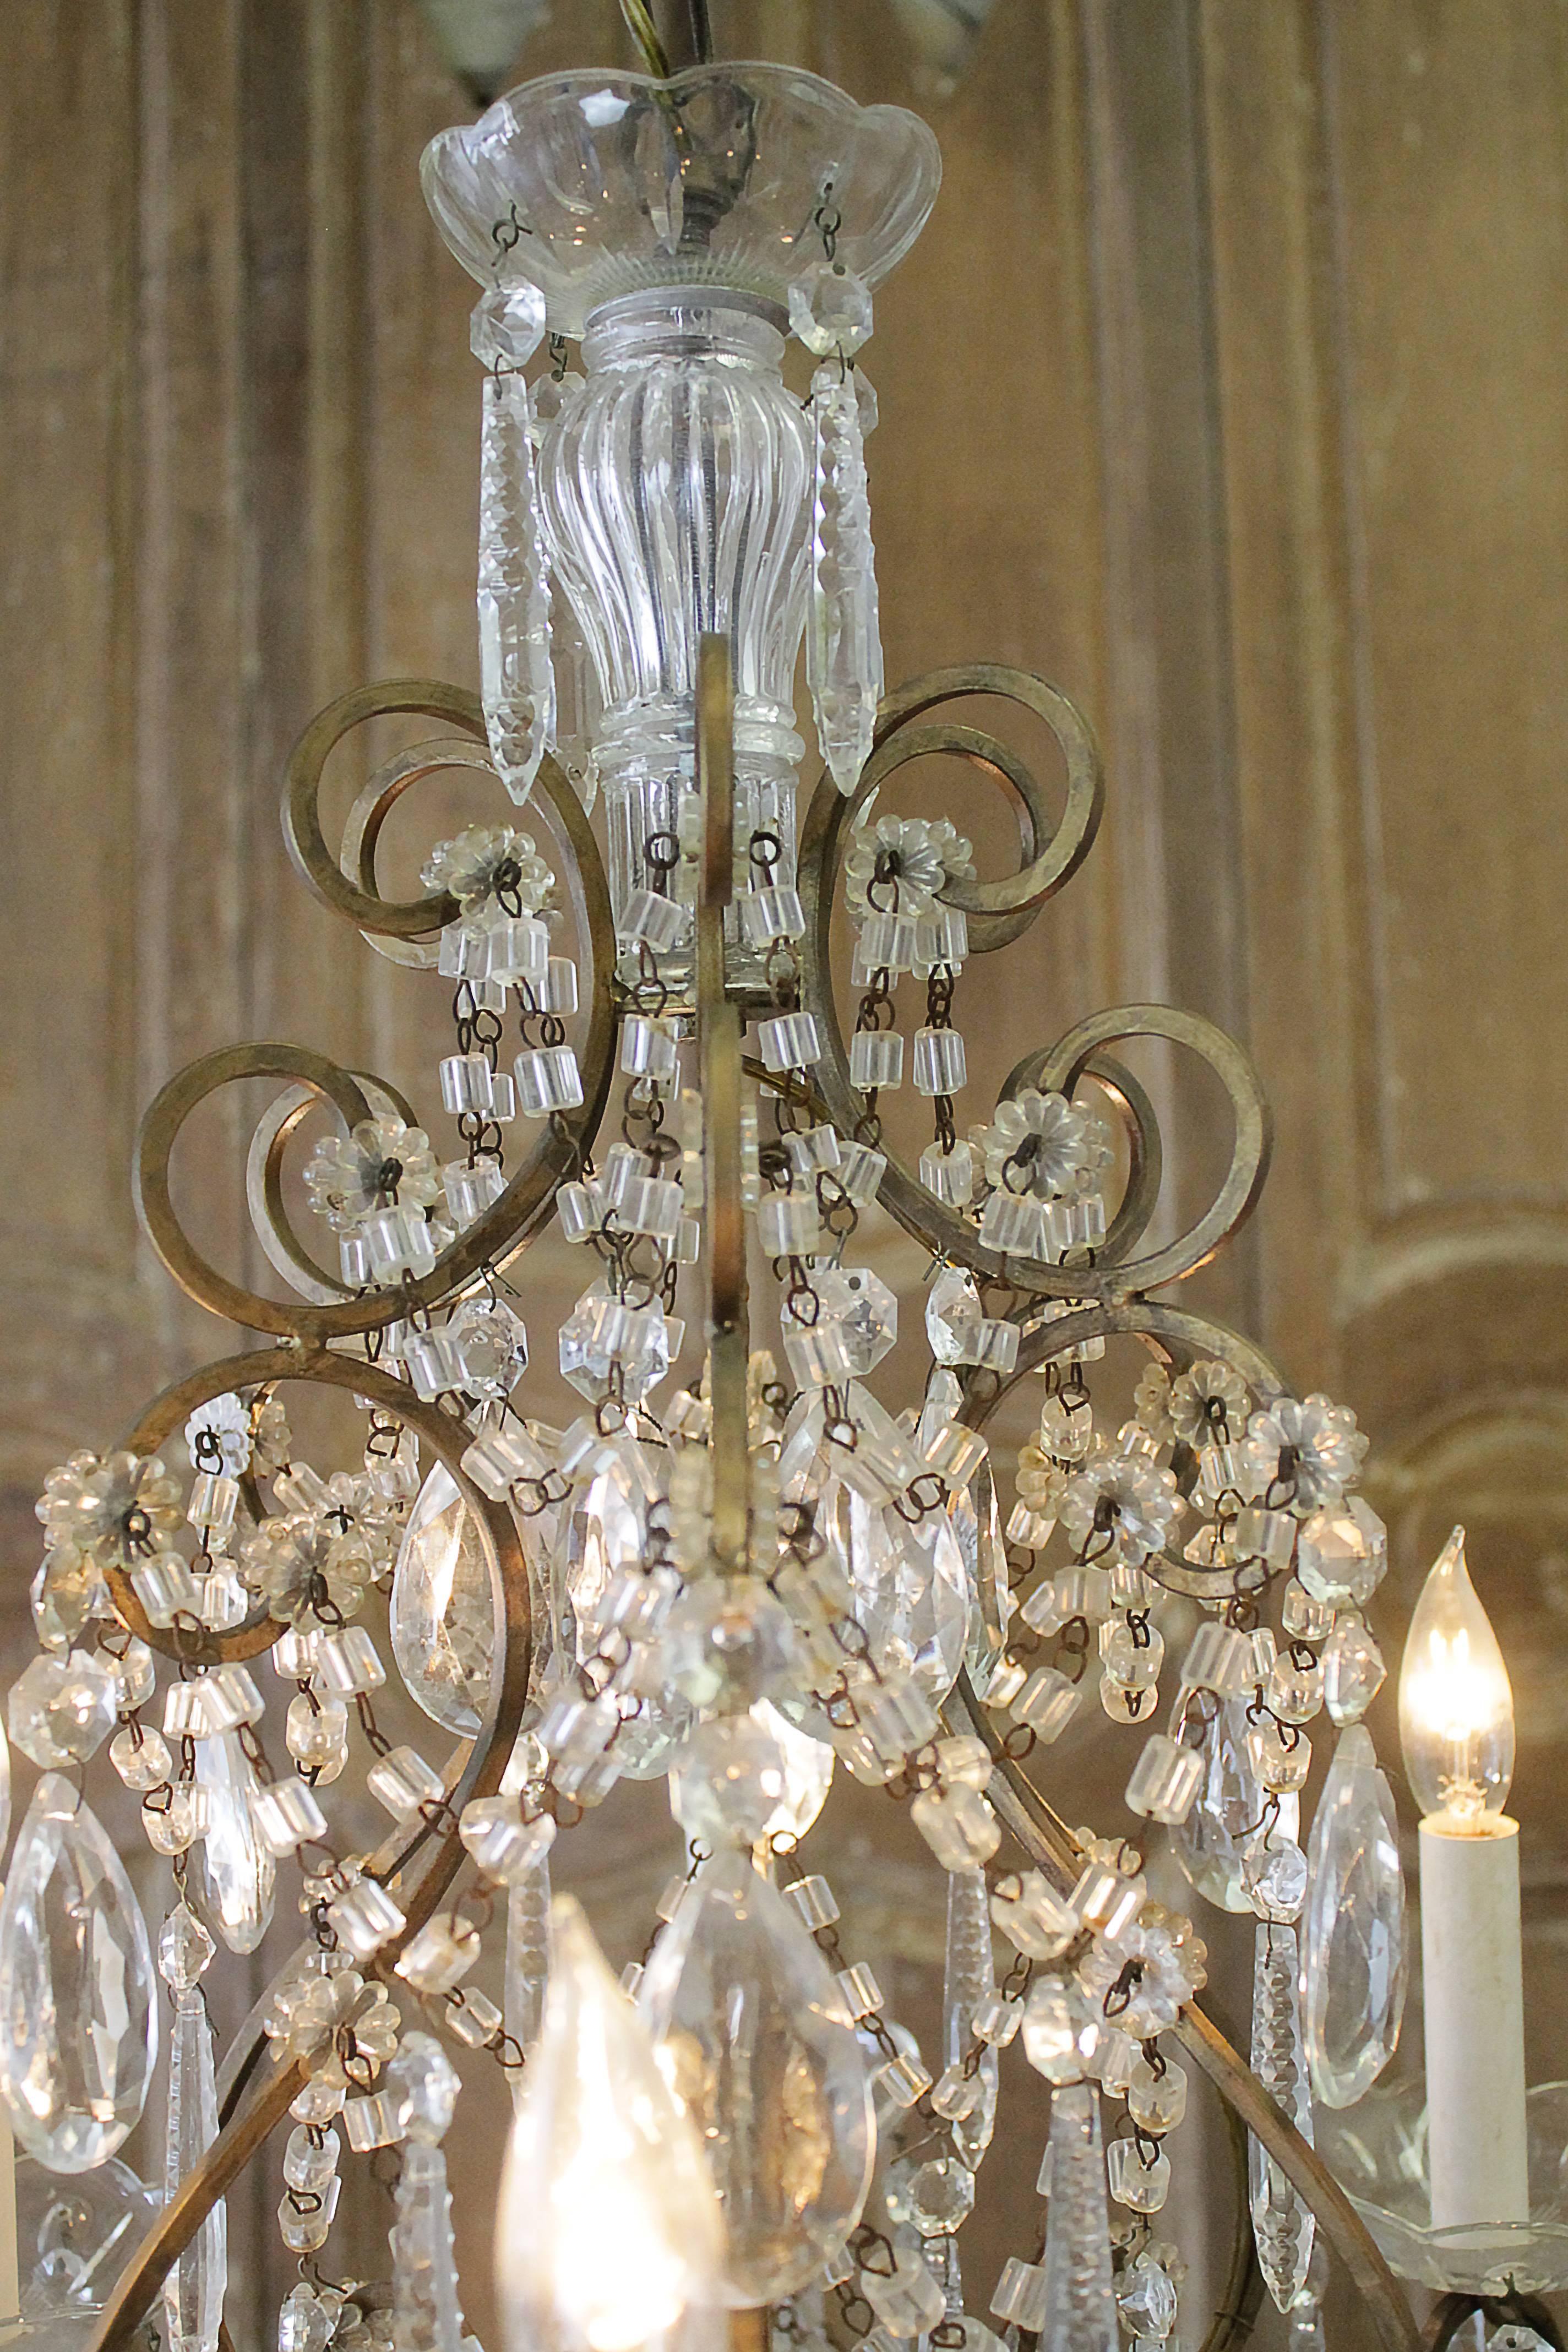 Beautiful Italian bronze frame chandelier with swags of large macaroni beads, and large glass crystals. Six-lights, in good working order. We do not have a ceiling medallion for this chandelier.
Measures 31